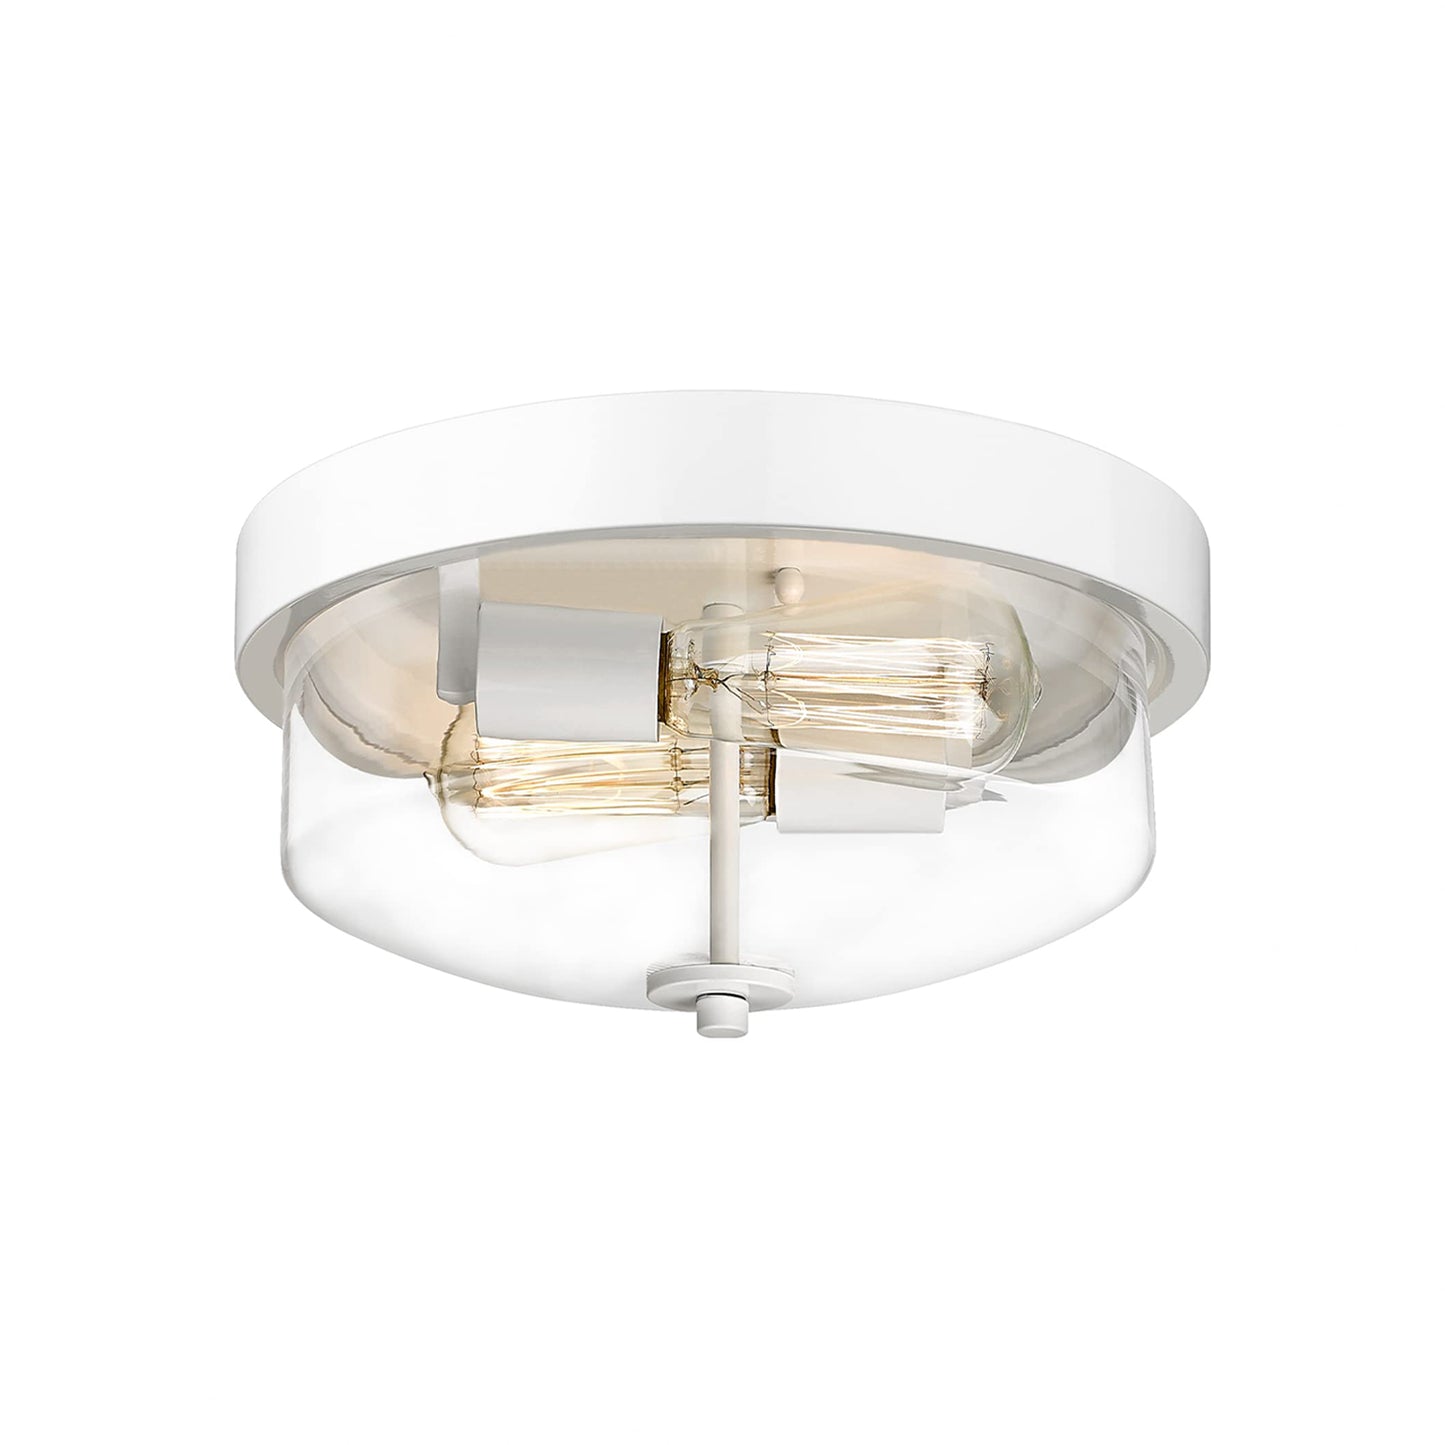 
                  
                    Emliviar 12 Inch Outdoor Ceiling Light - Farmhouse Flush Mount Close to Ceiling Light with Clear Glass Shade, Gold Finish, TE217F BG
                  
                